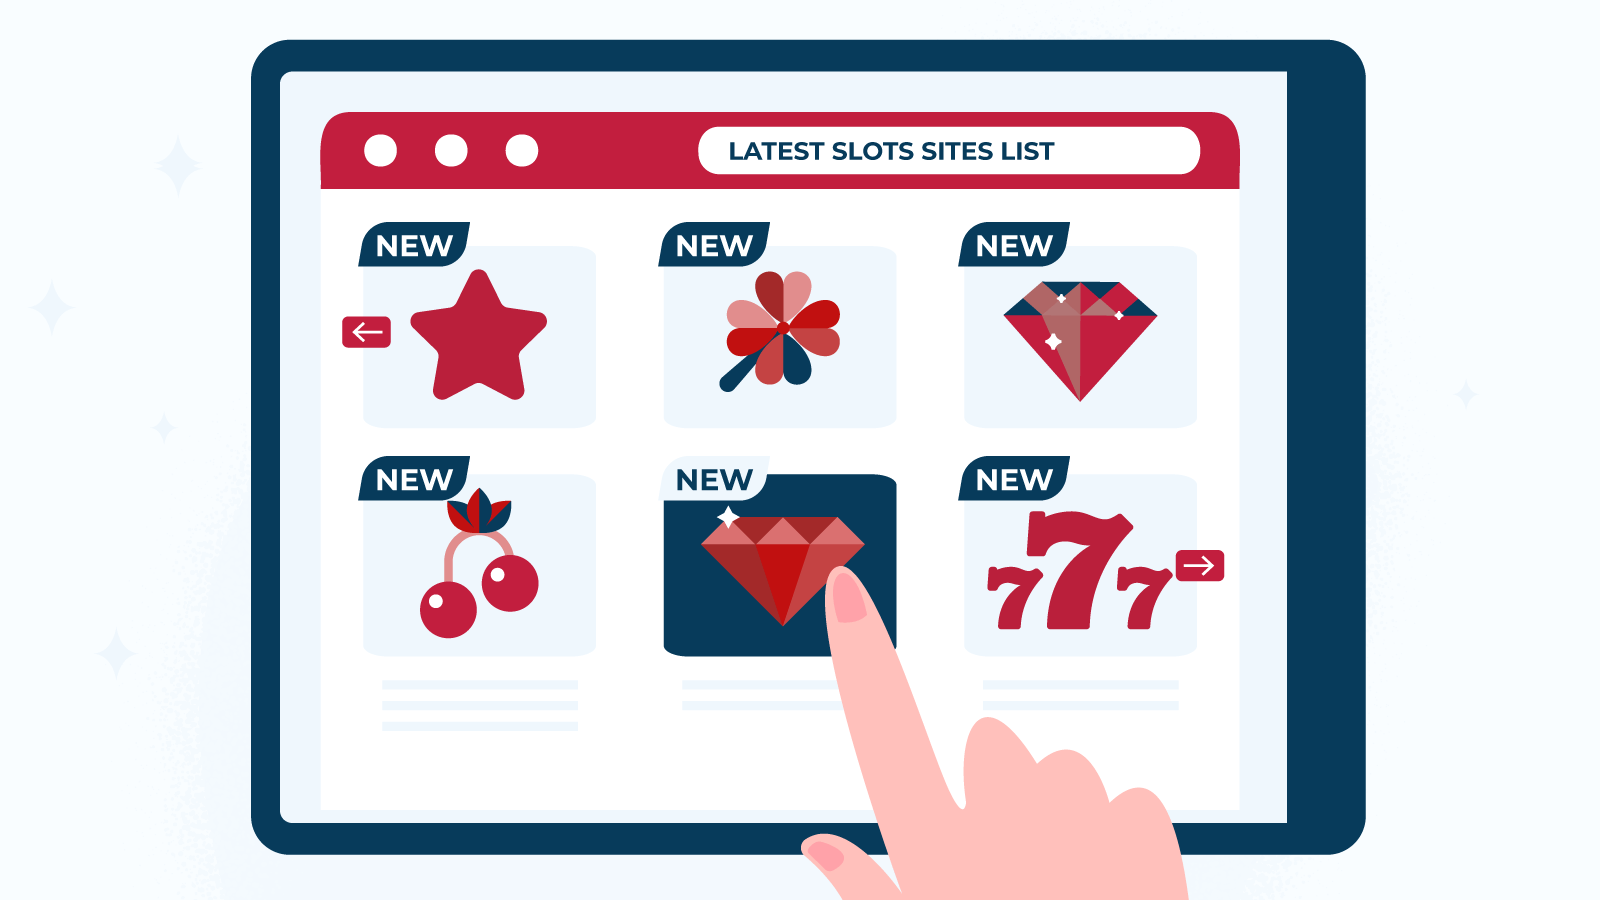 Find Your Best Pick from Our Latest Slots Sites List